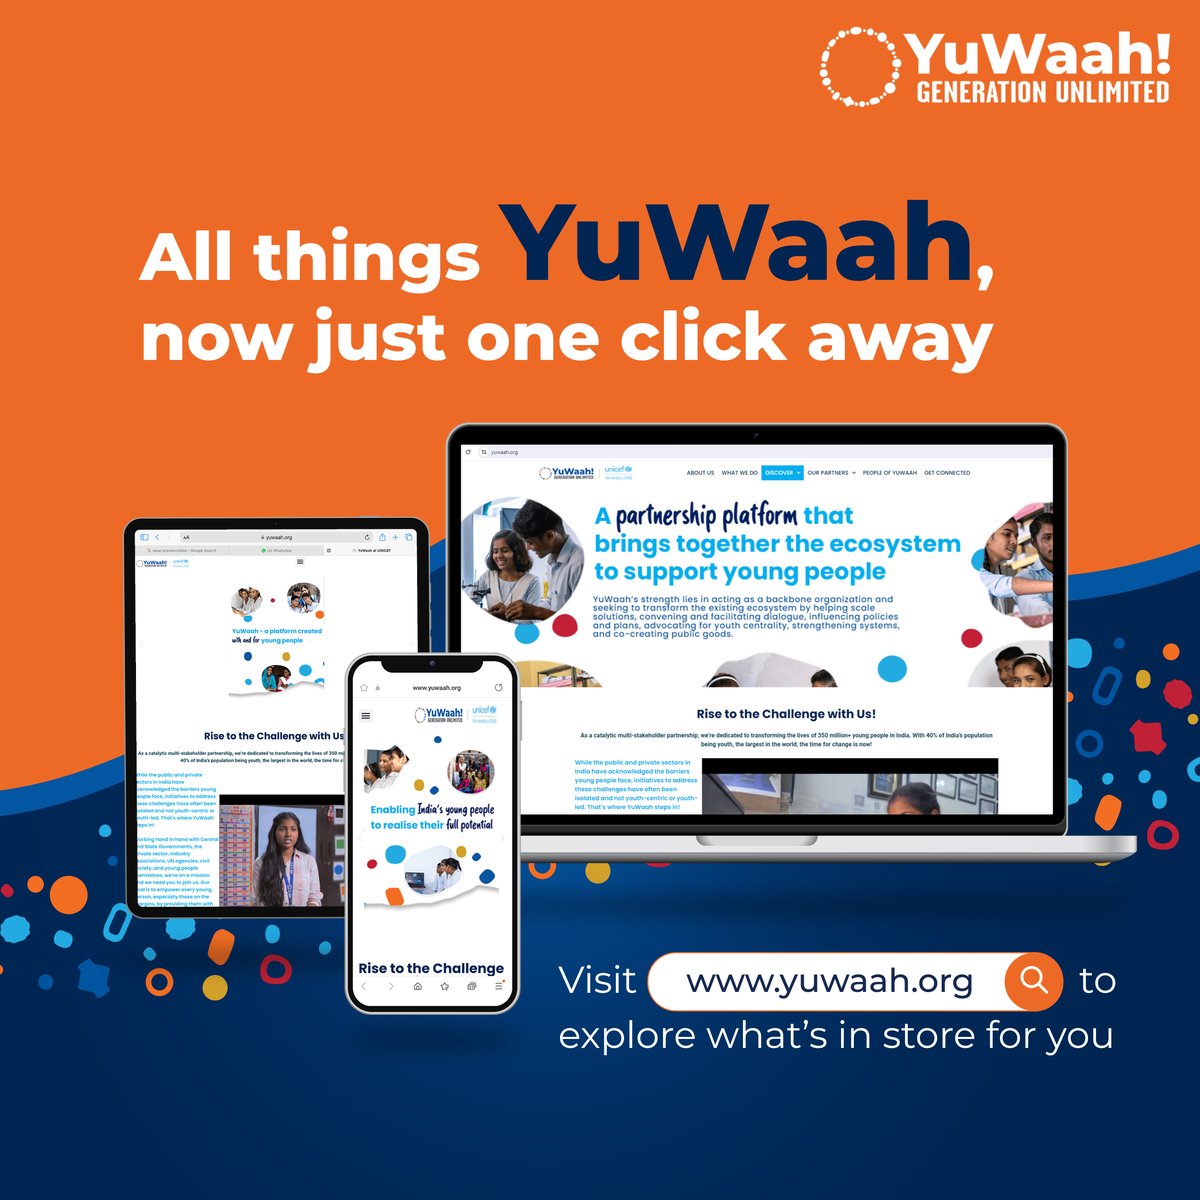 Be it a mobile phone, desktop or tablet, your journey with #YuWaah will always be a seamless one! Our website's interface ensures access to all the information, enabling the youth to explore countless opportunities anytime, anywhere. 🔗Get started: yuwaah.org